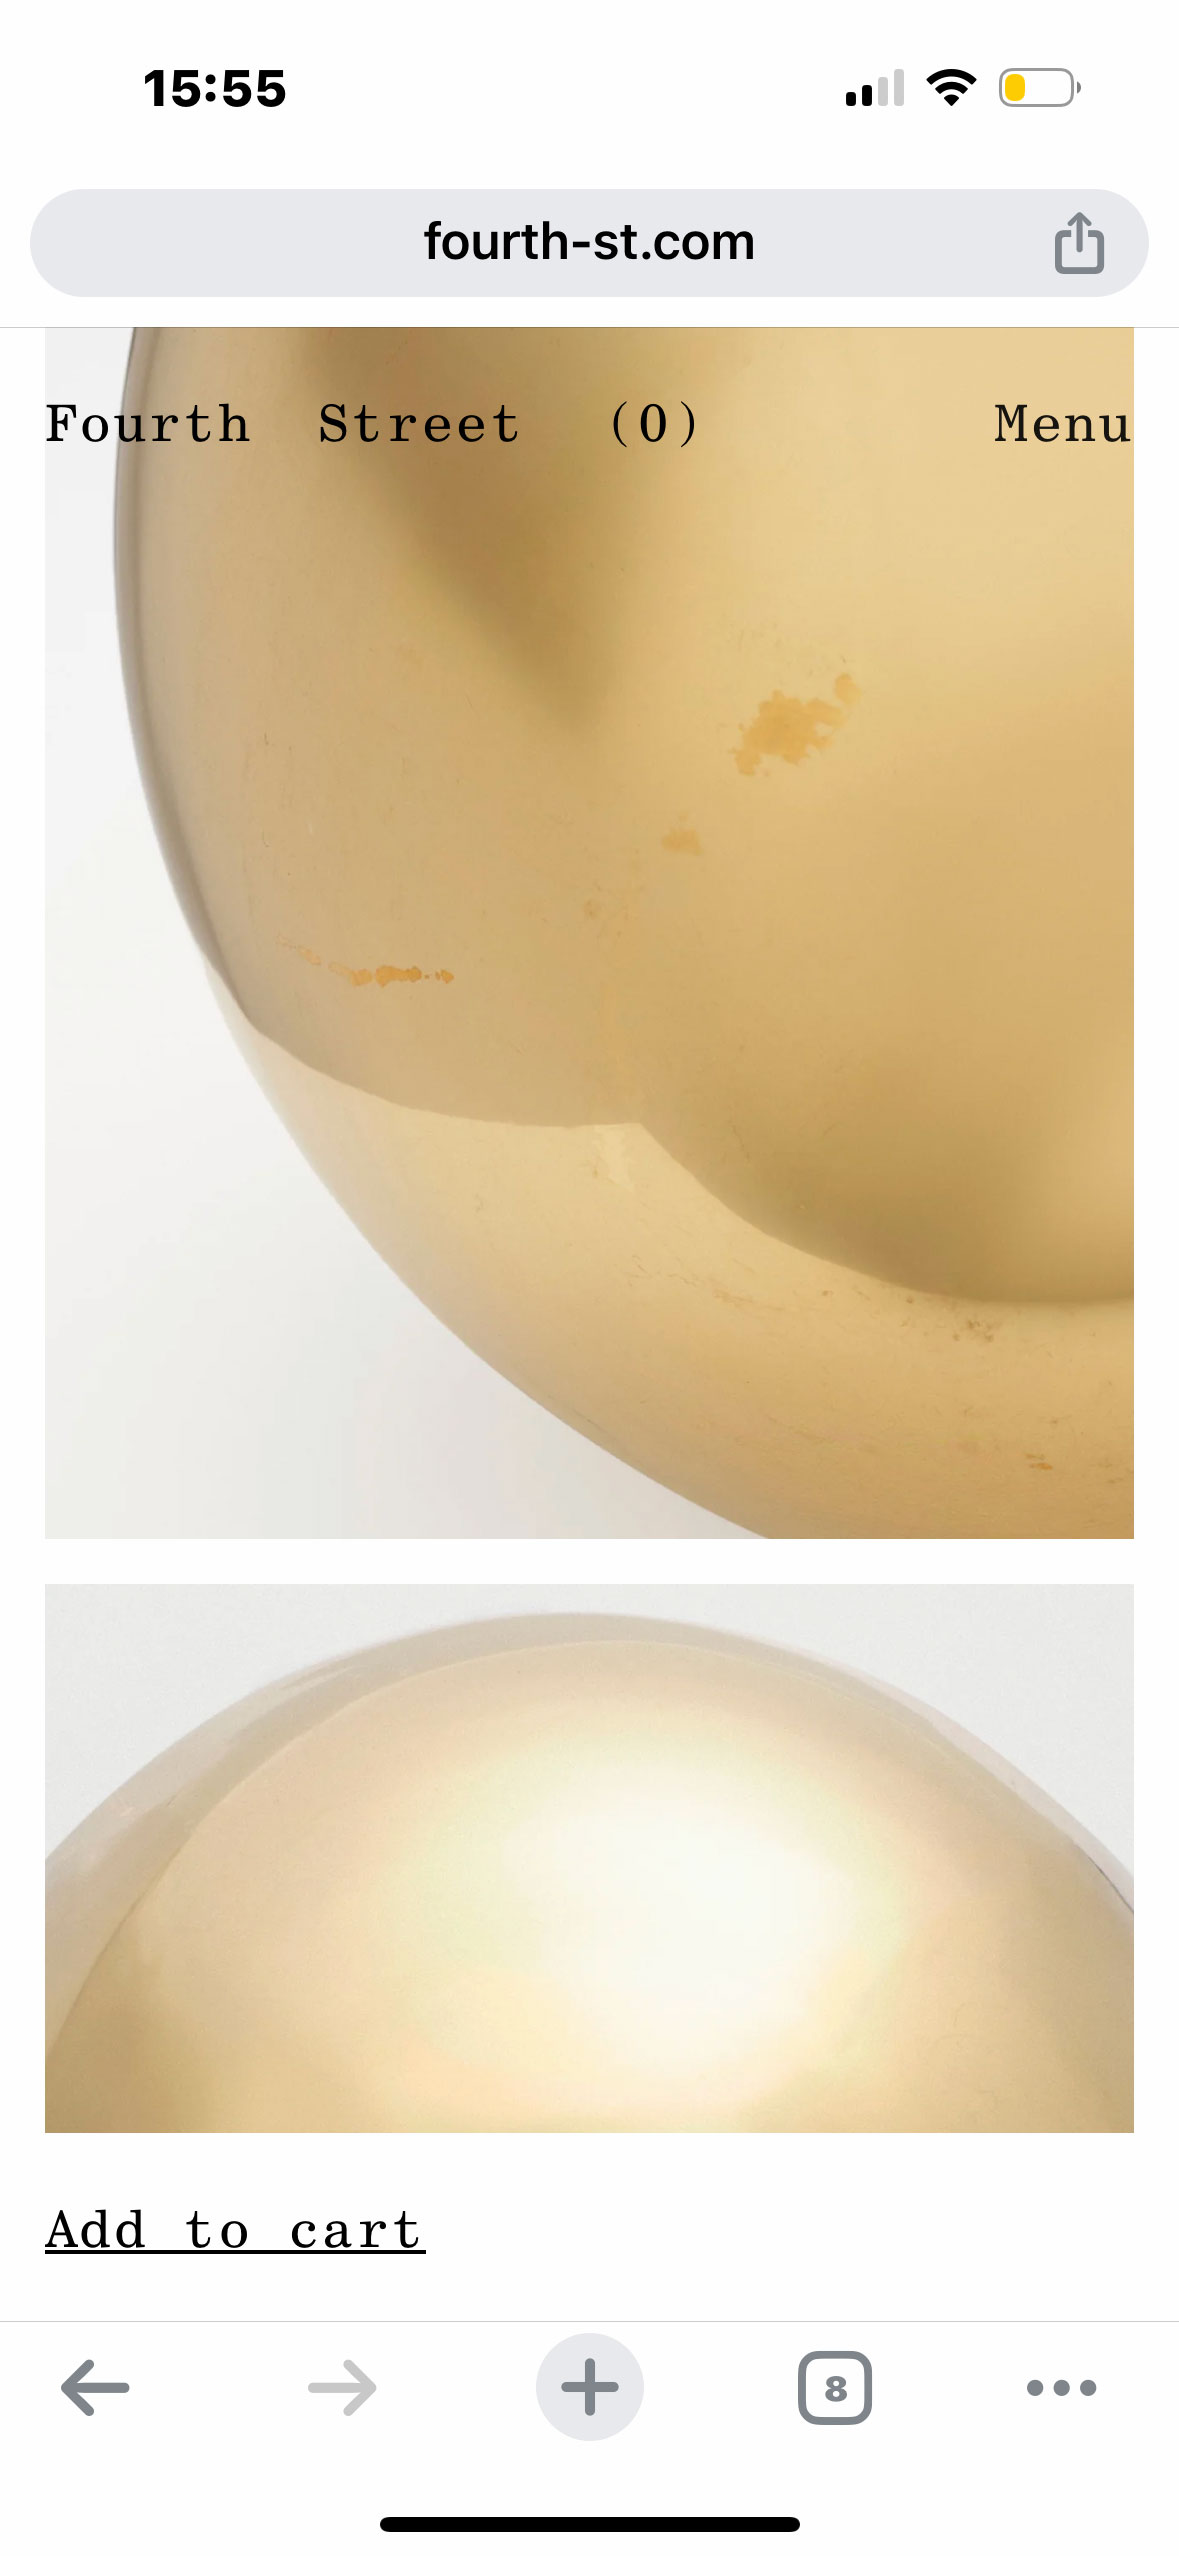 Adriano Orlando does the development for Fourth Street with Meide Engineering. Brass Egg Sculpture product page screenshot.